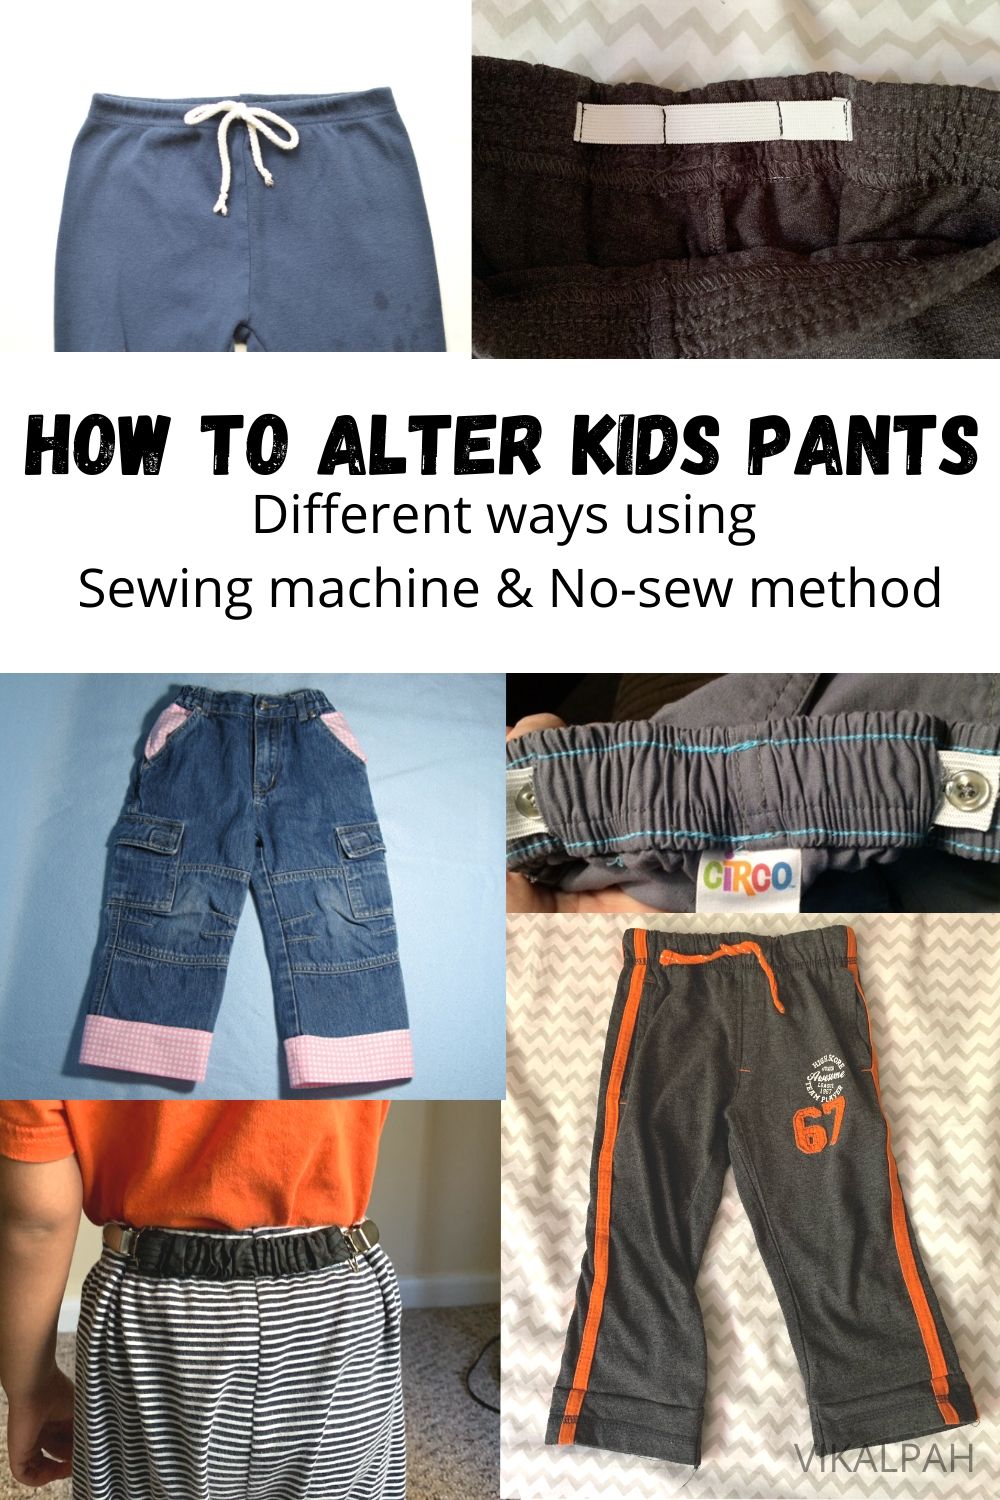 Vikalpah: How to alter kids pants - Different ways of No-sew & sewing method